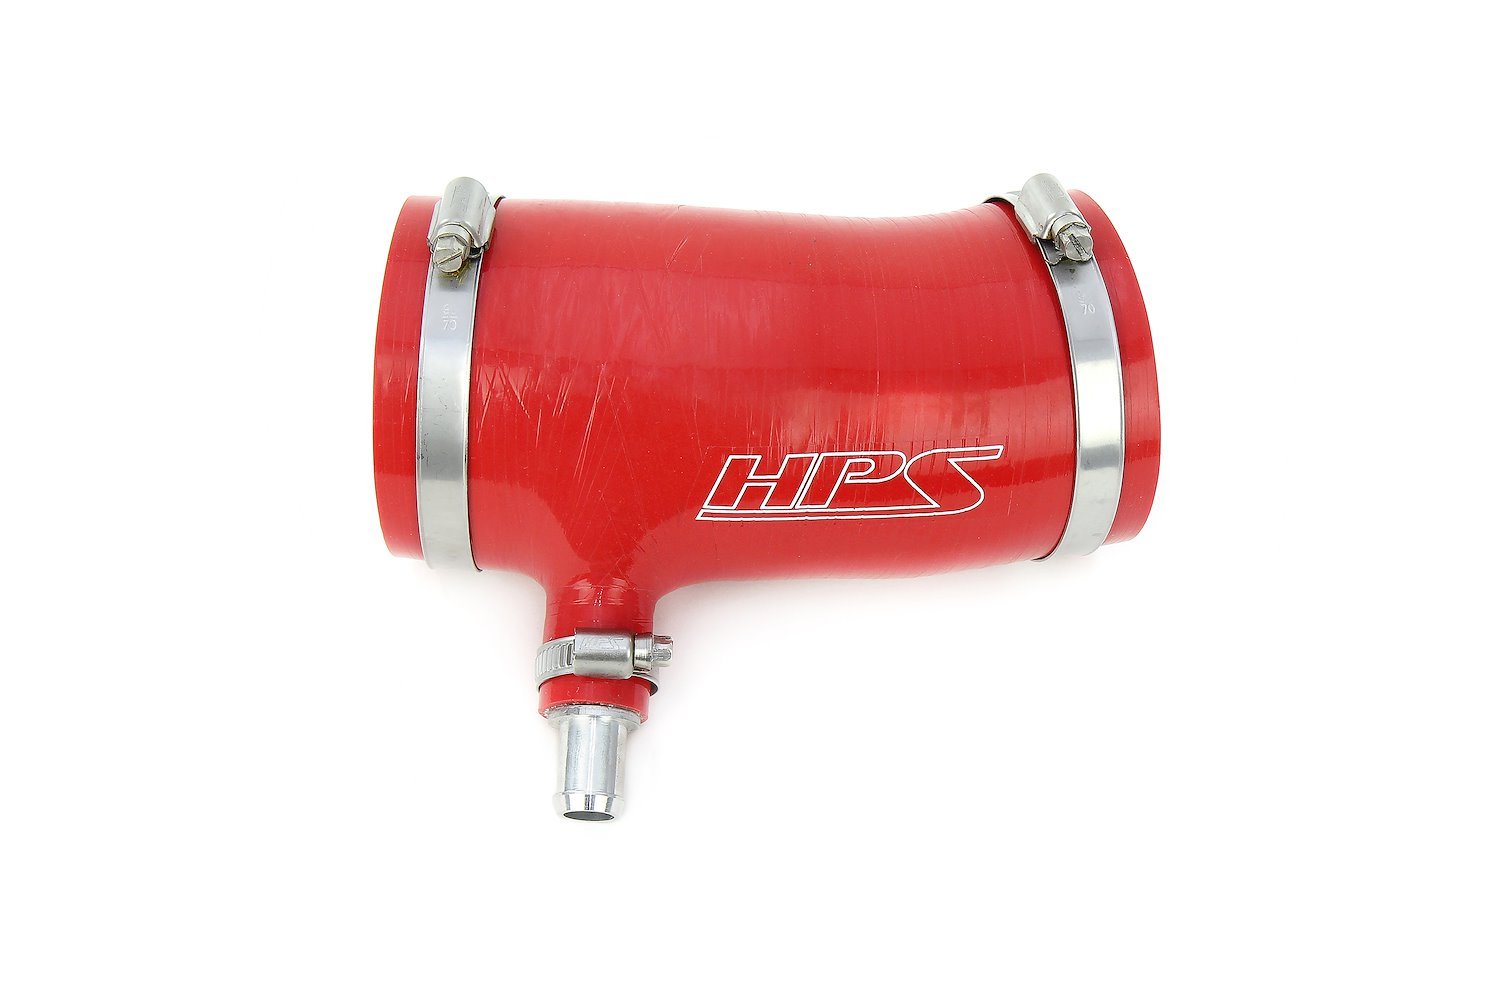 57-2123-RED Silicone Air Intake Kit, Replaces Stock Restrictive Air Intake, Improve Throttle Response, No Heat Soak